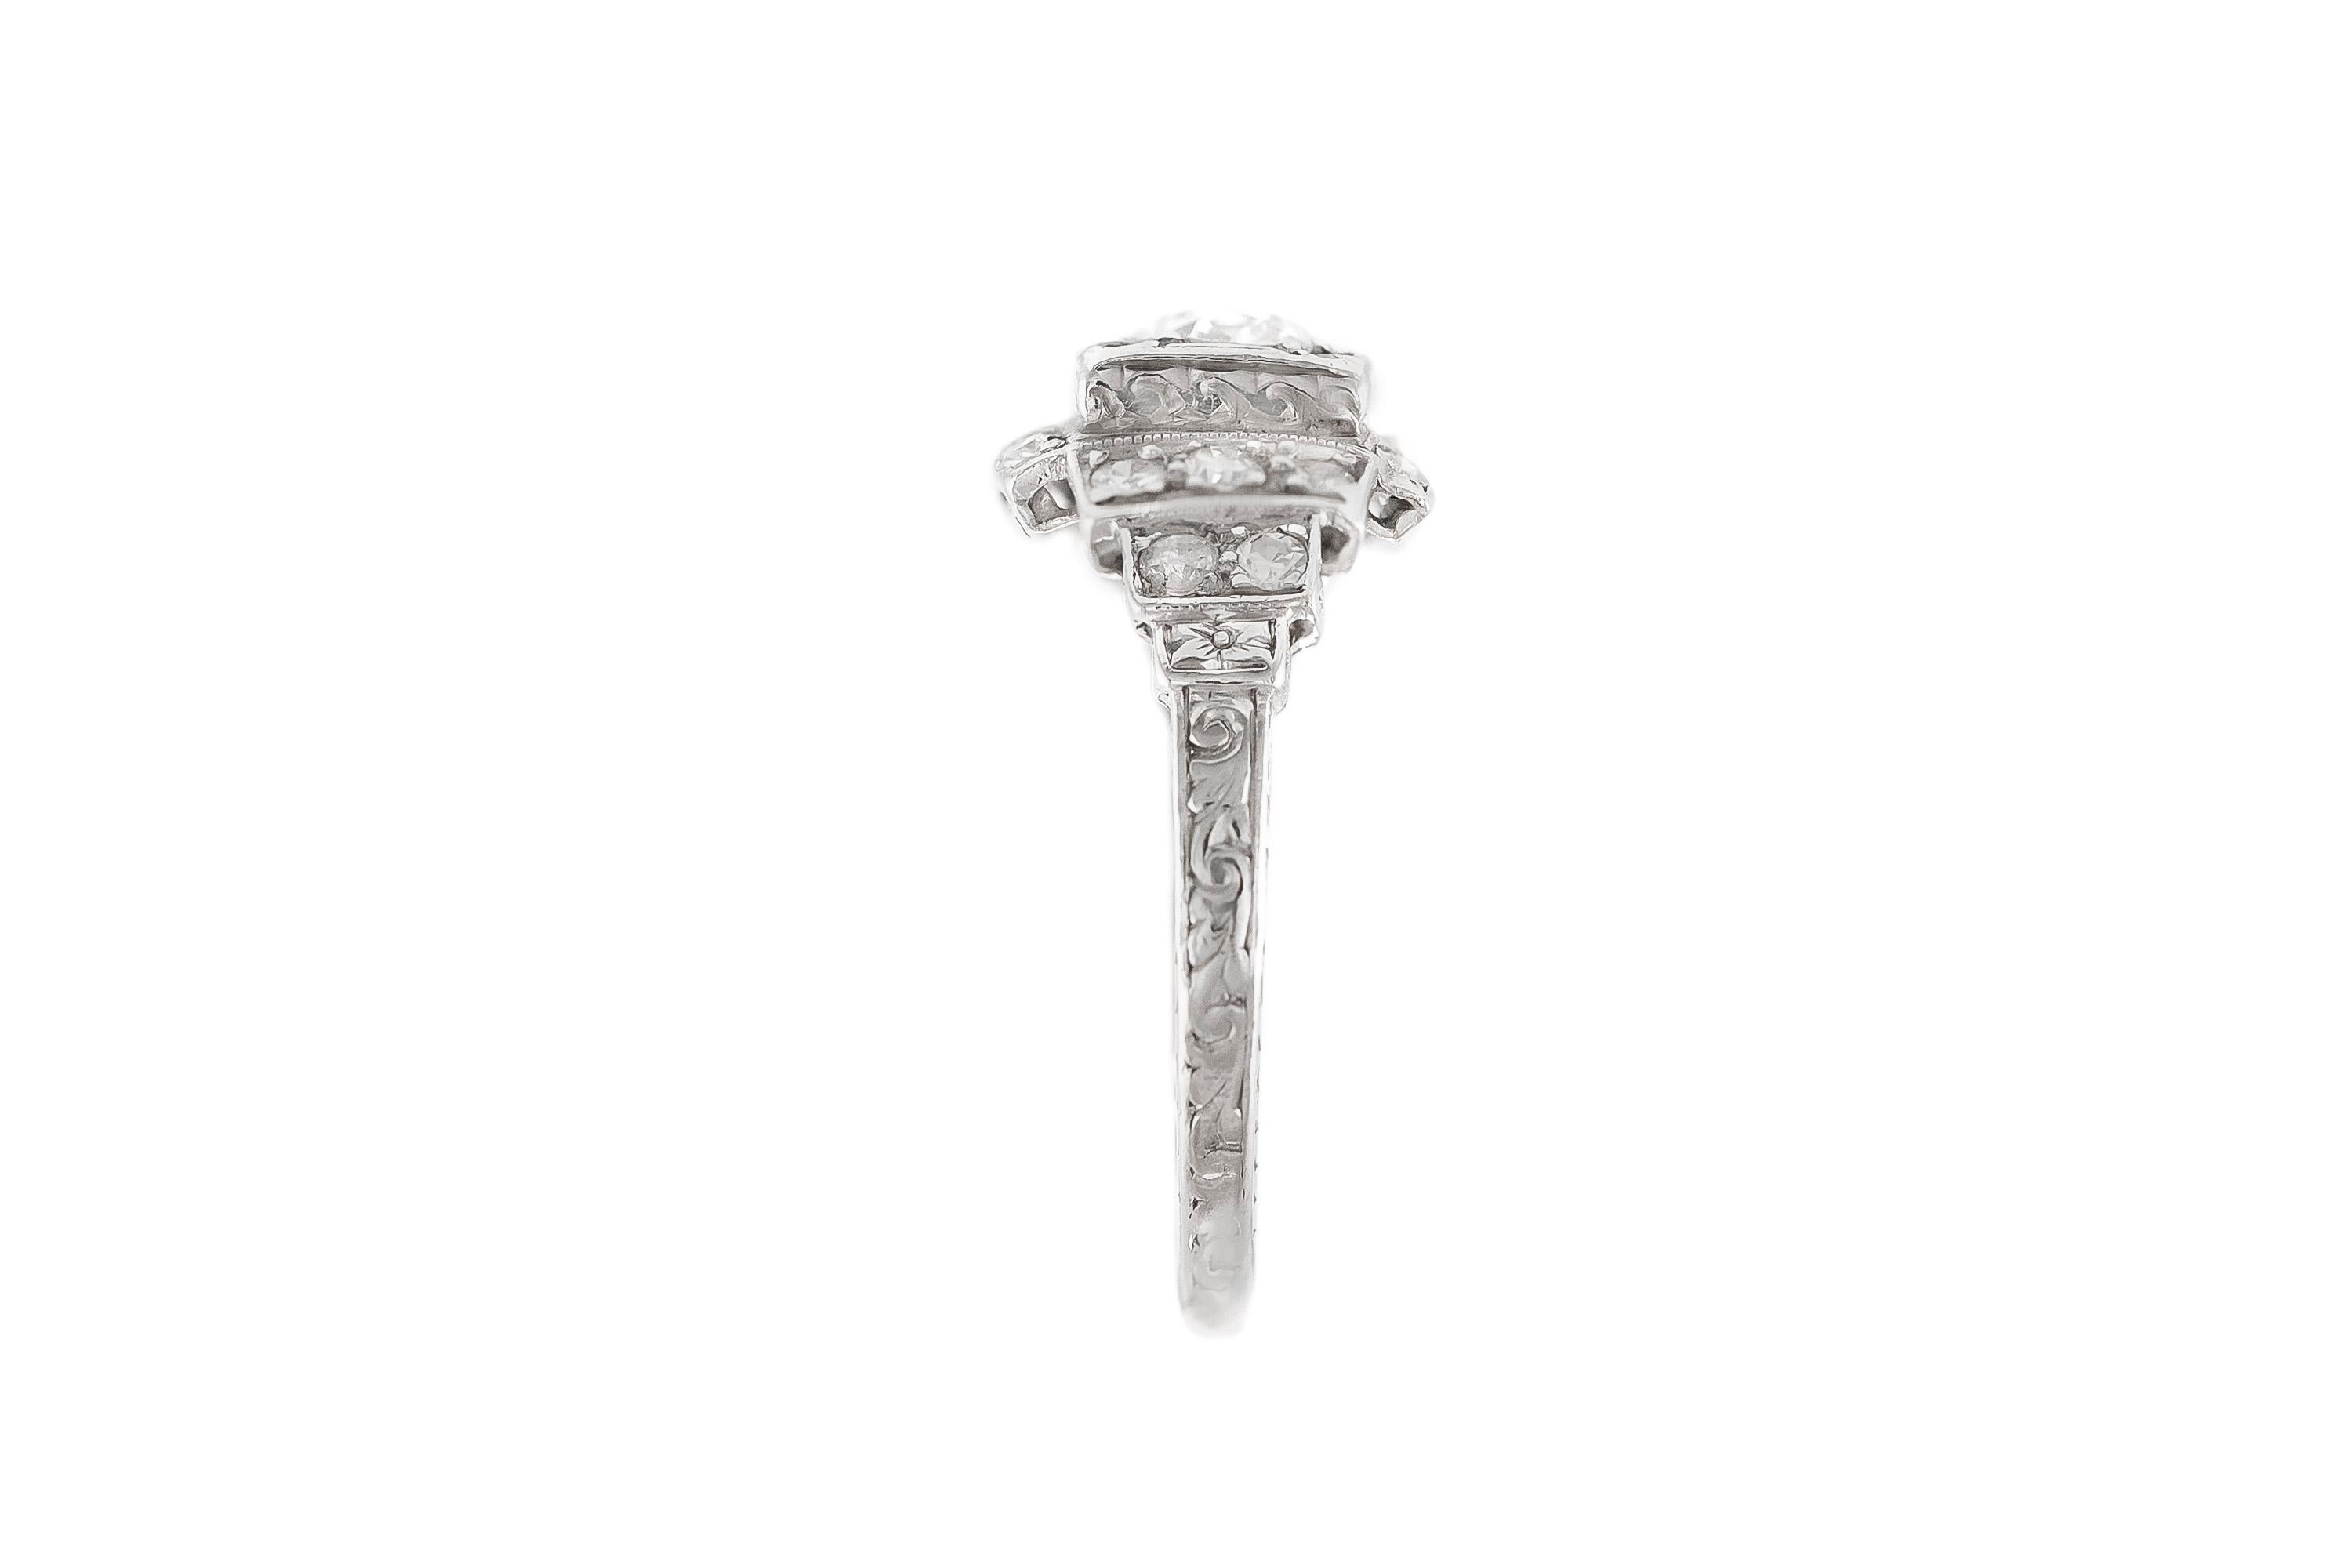 The ring is finely crafted in platinum with center diamond weighing approximately total of 0.75  carat and around diamond weighing approximately total of 0.30 carat.
Circa 1920-1930